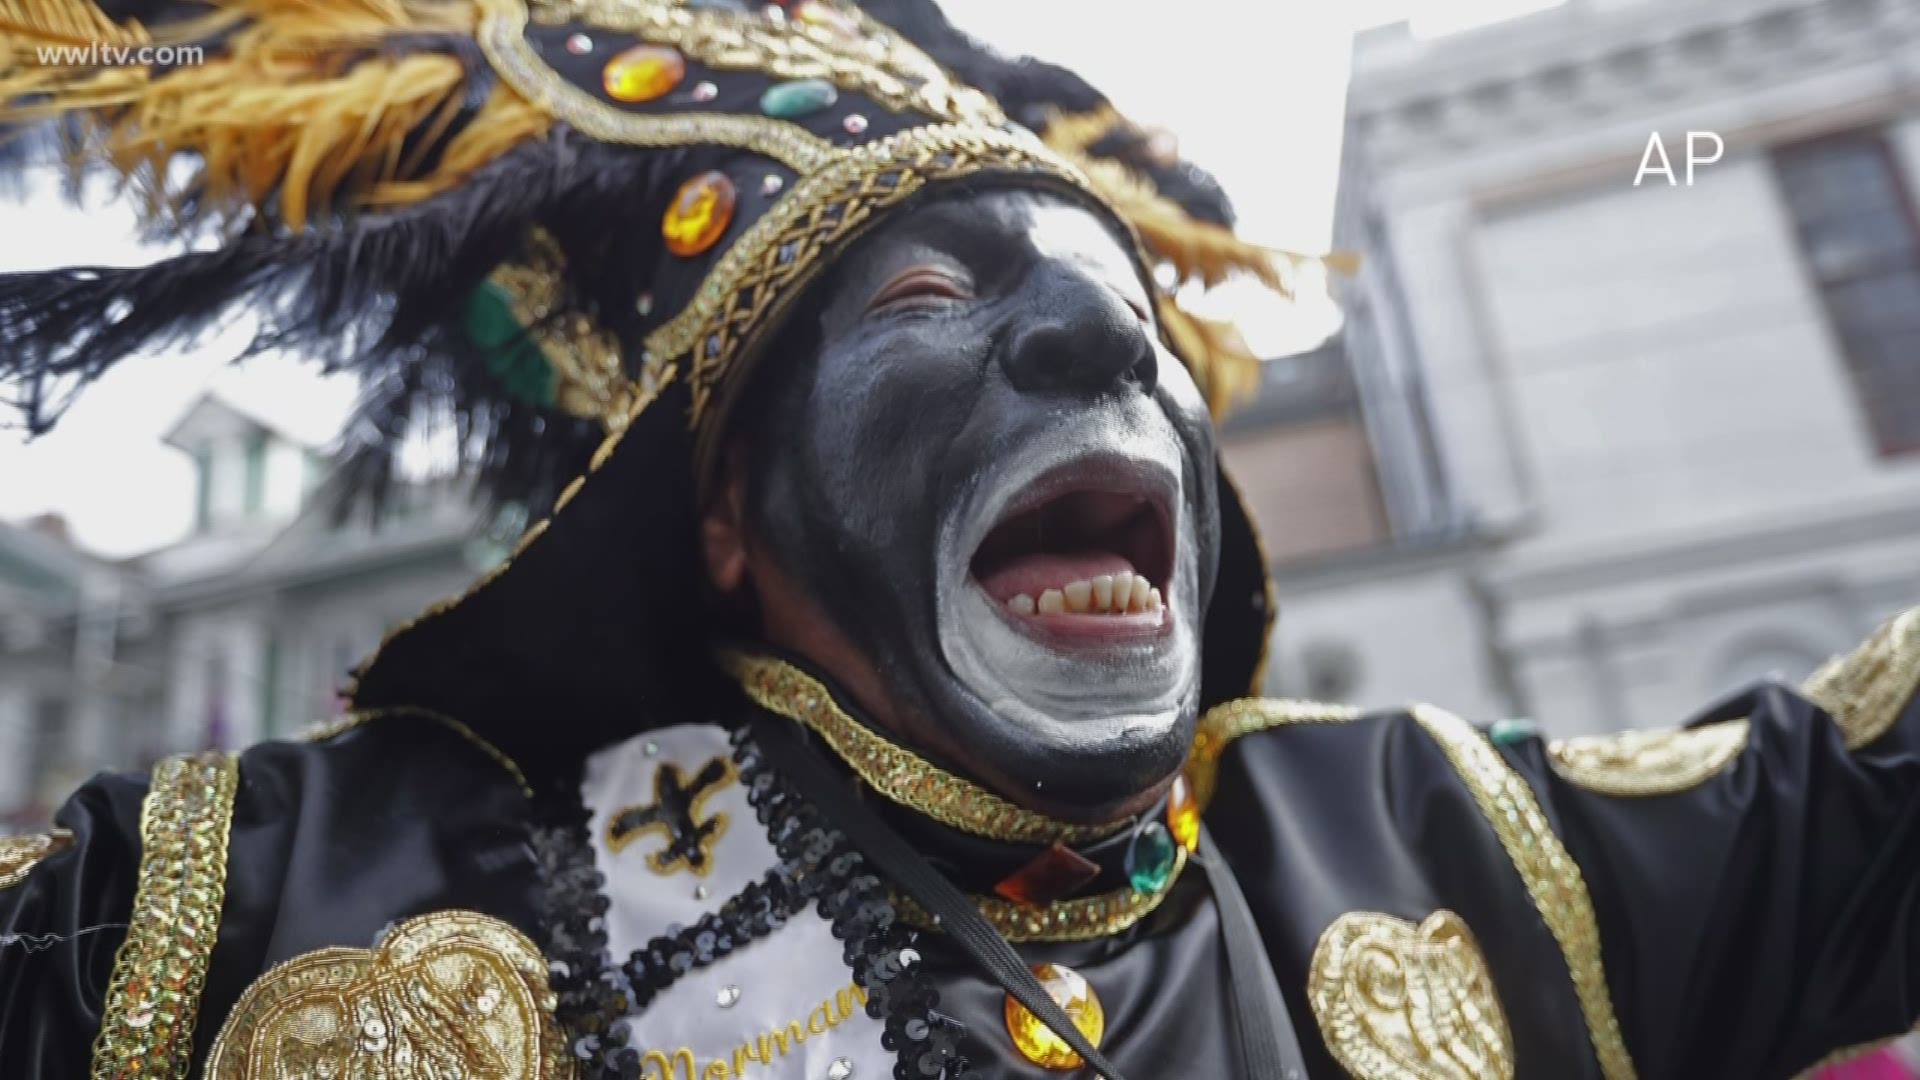 As lawmakers in Virginia face backlash over their use of blackface, Zulu historian Clarence Becknell said the krewe has no plans of stopping its tradition.